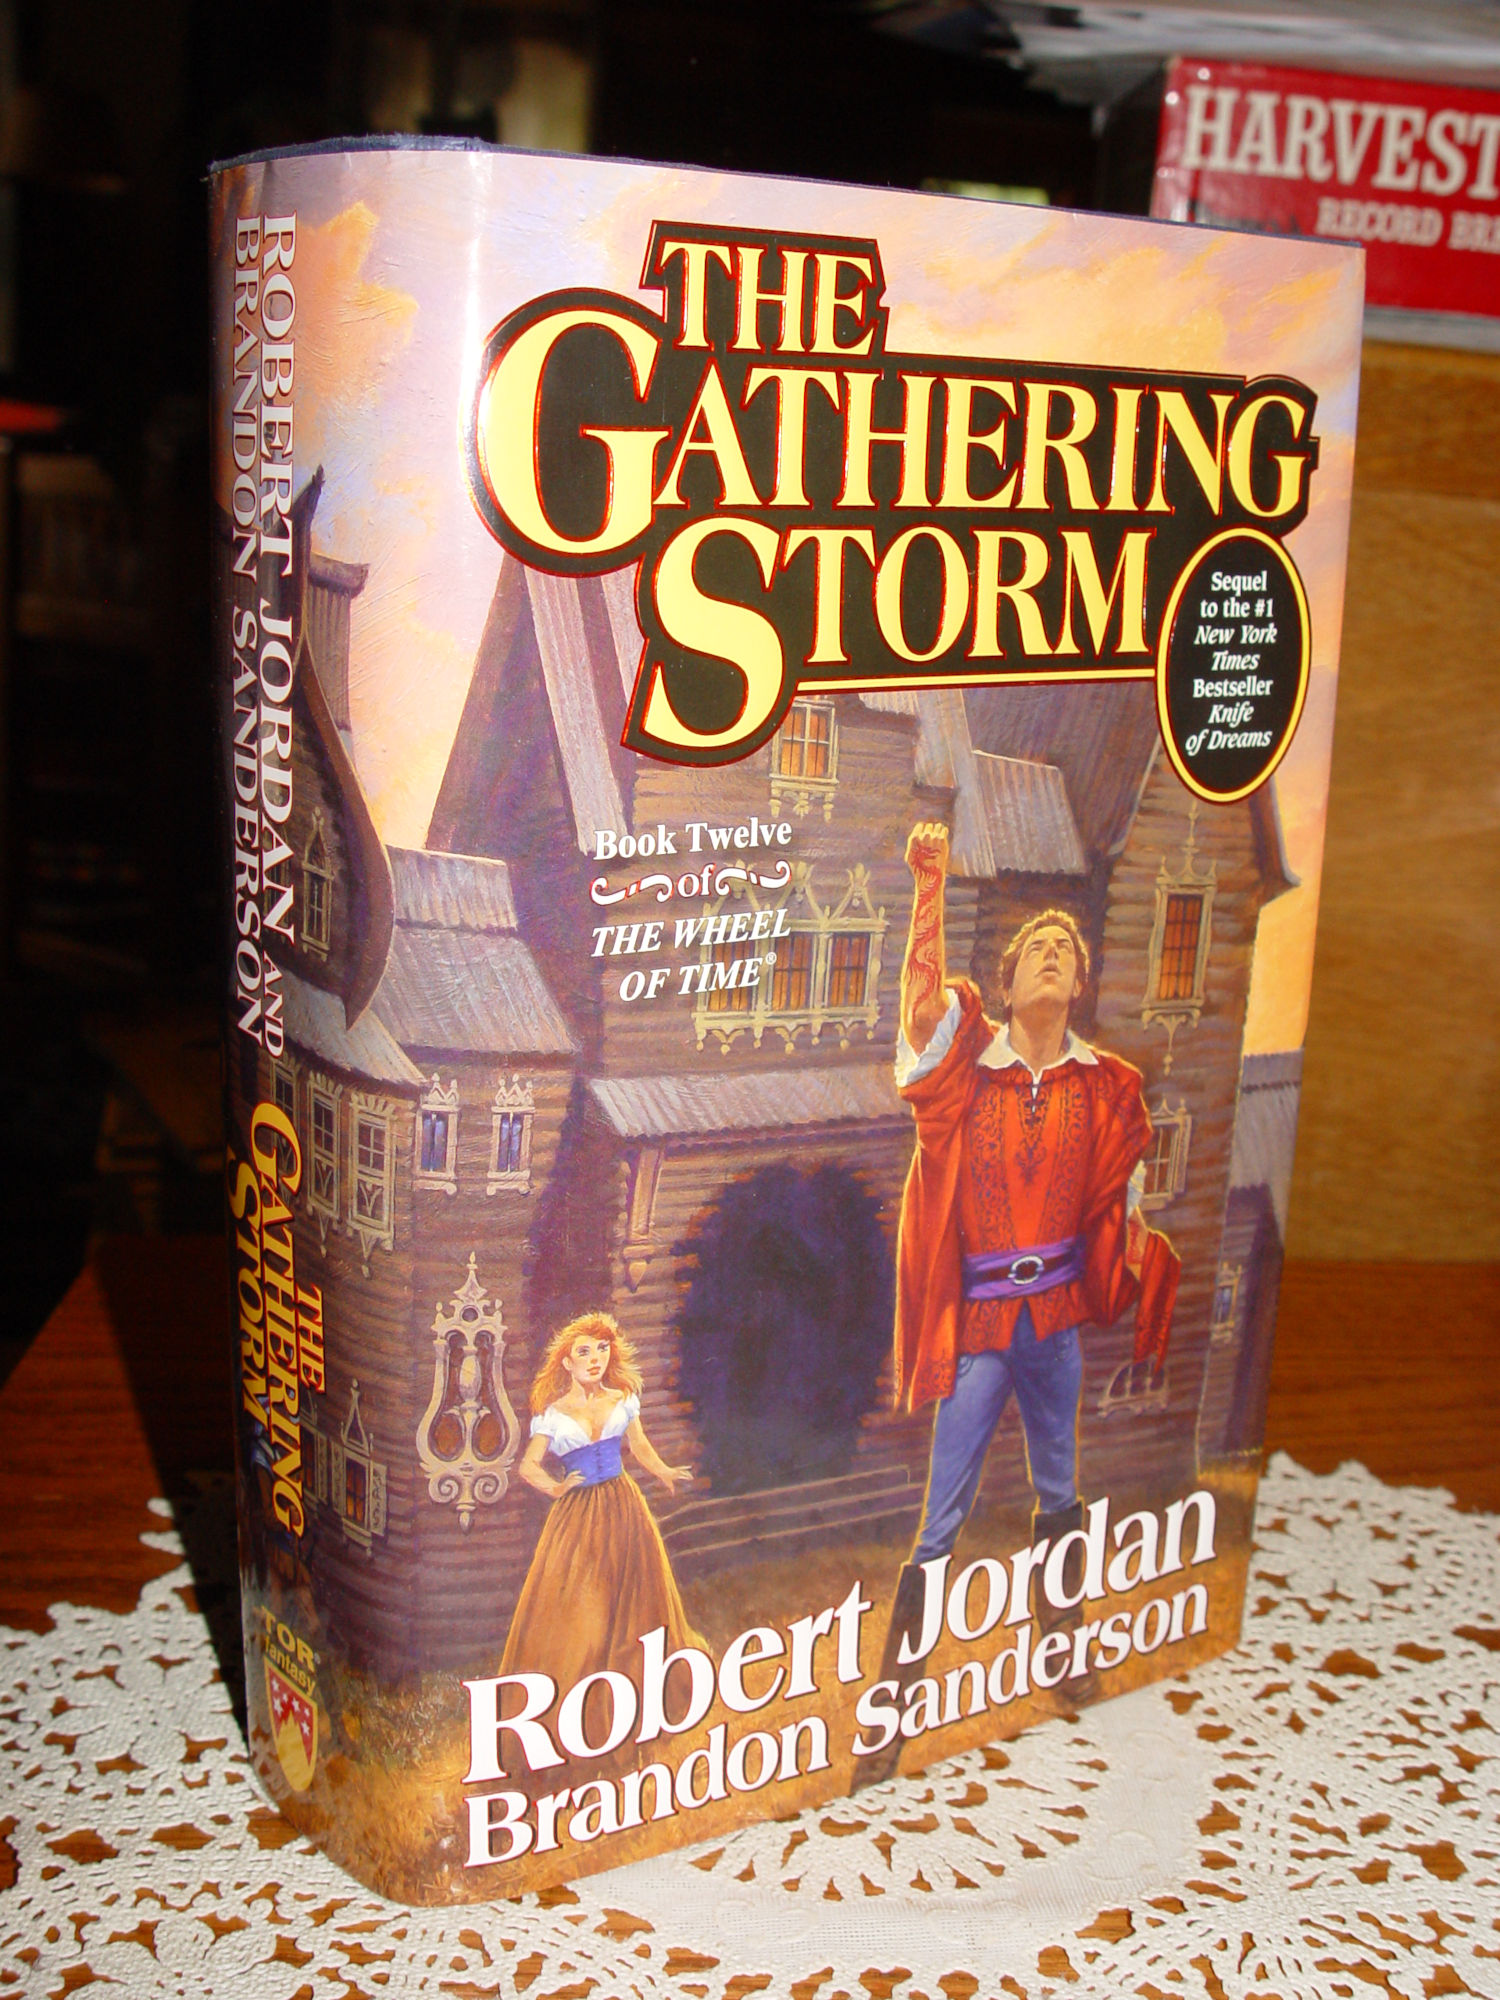 The Gathering Storm 2009 Signed: Book 12 of
                        'The Wheel of Time' R Jordan B Sanderson